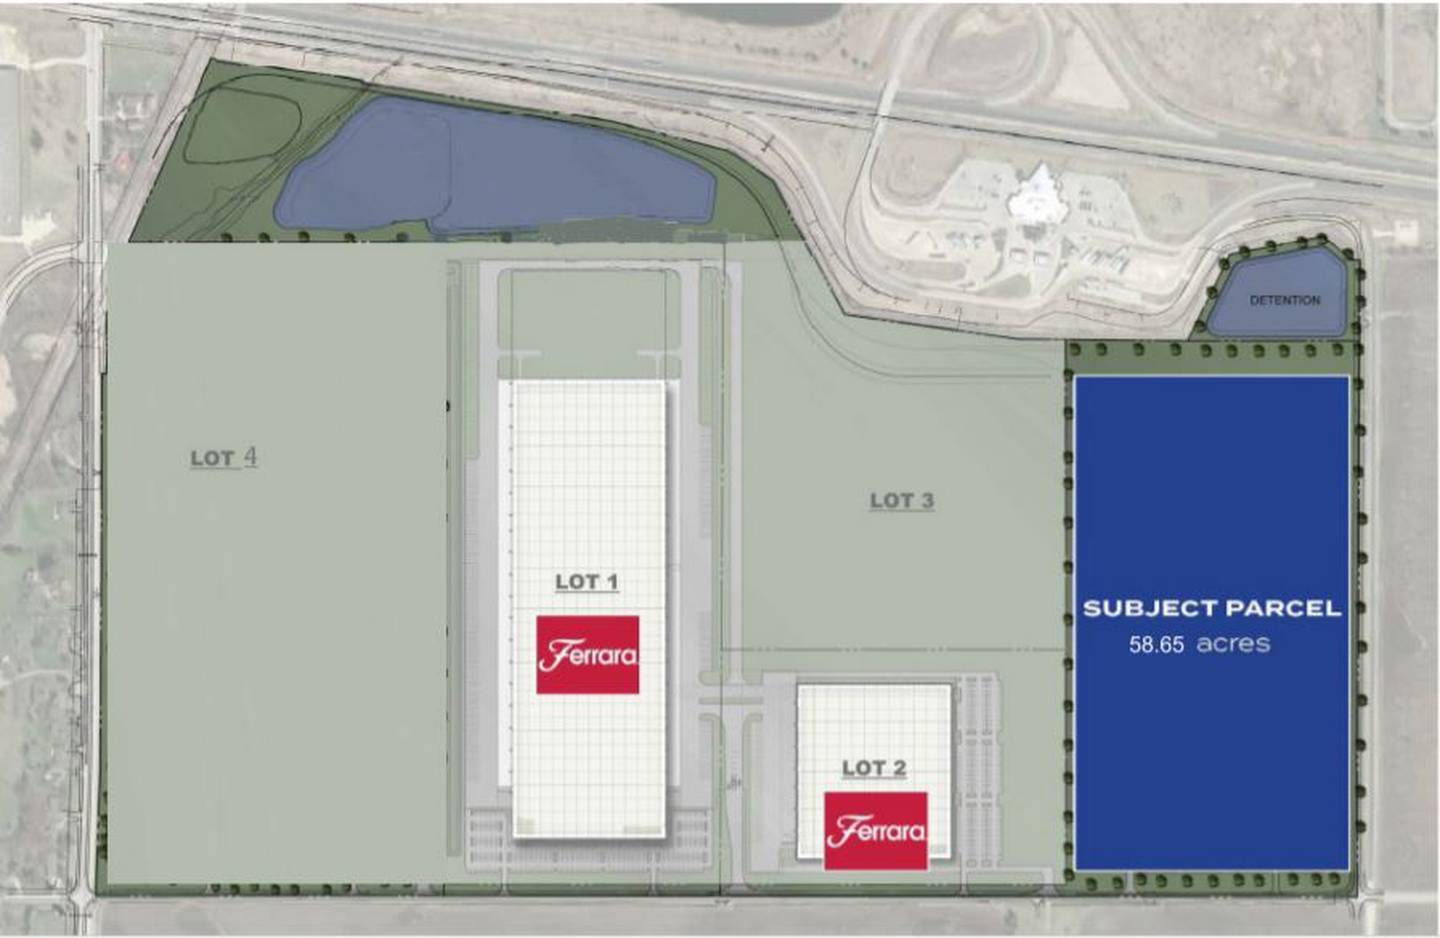 The DeKalb City Council approved on Monday amendments to ordinances regarding "Project Barb," a 700,000-square-foot warehouse and distribution center planned by an unknown developer on 58 acres in the Chicago West Business Center. "Project Barb" is the subject parcel shown.